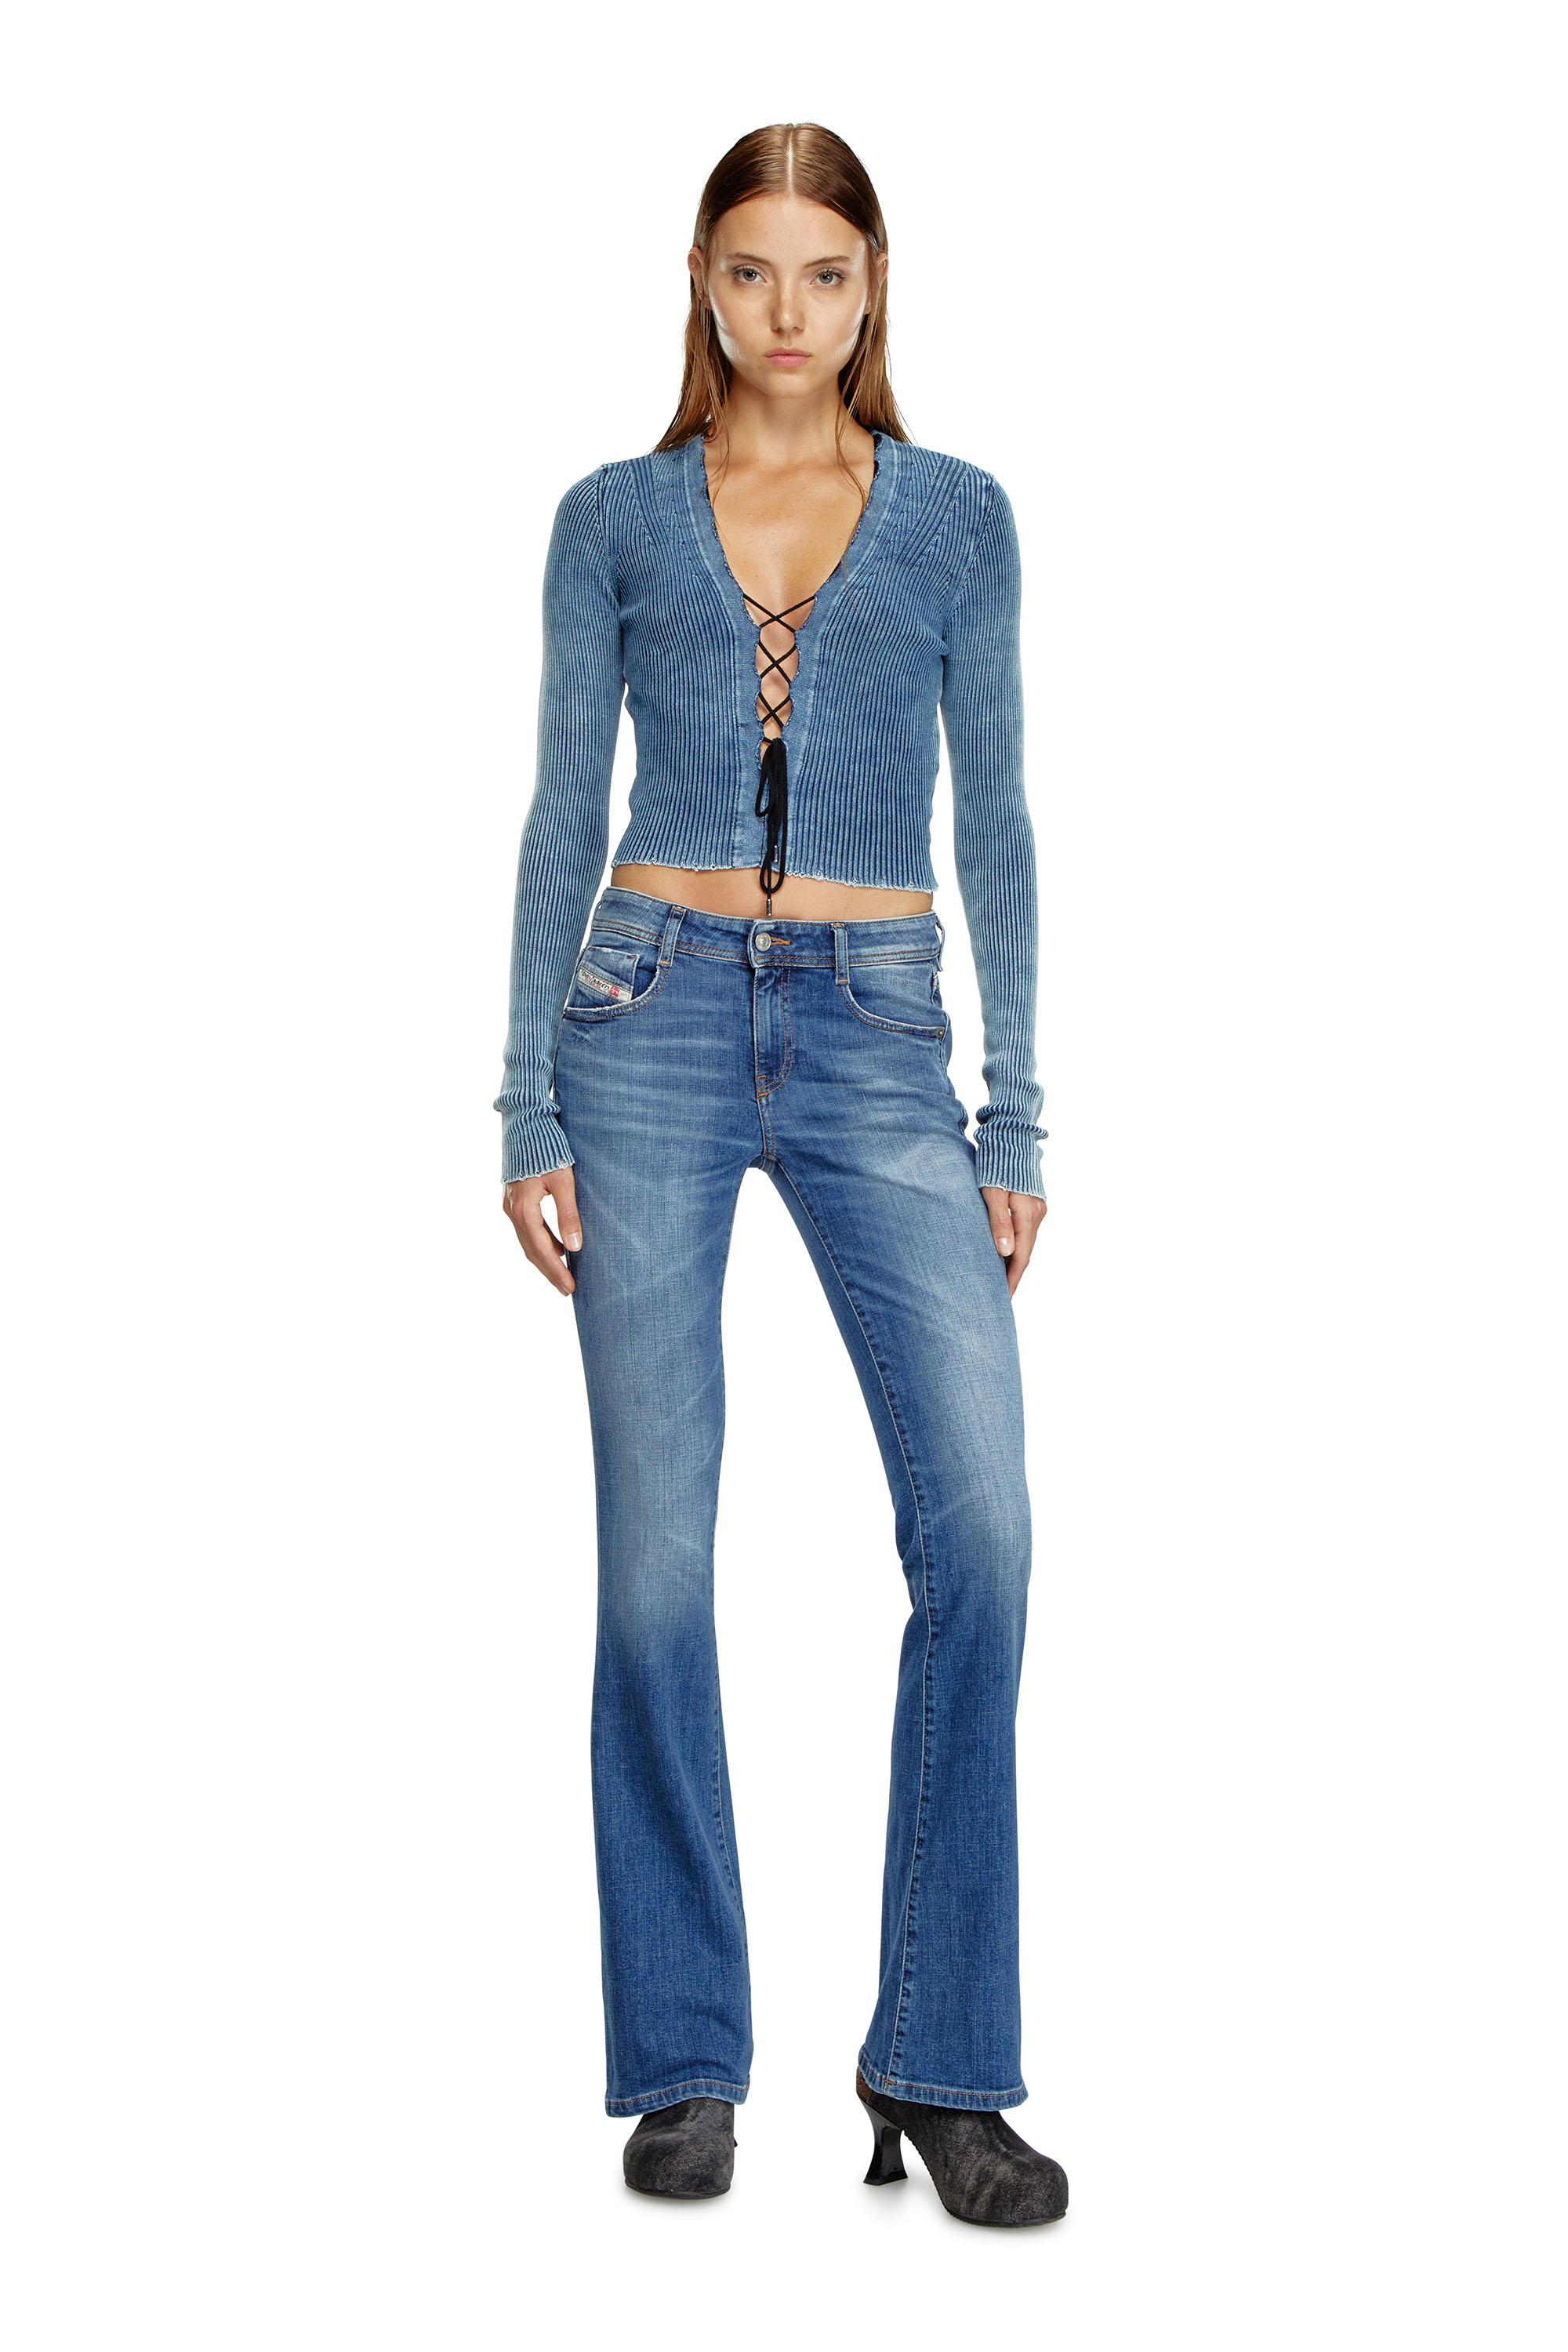 Diesel - Bootcut and Flare Jeans 1969 D-Ebbey 09J33, Mujer Bootcut y Flare Jeans - 1969 D-Ebbey in Azul marino - Image 1